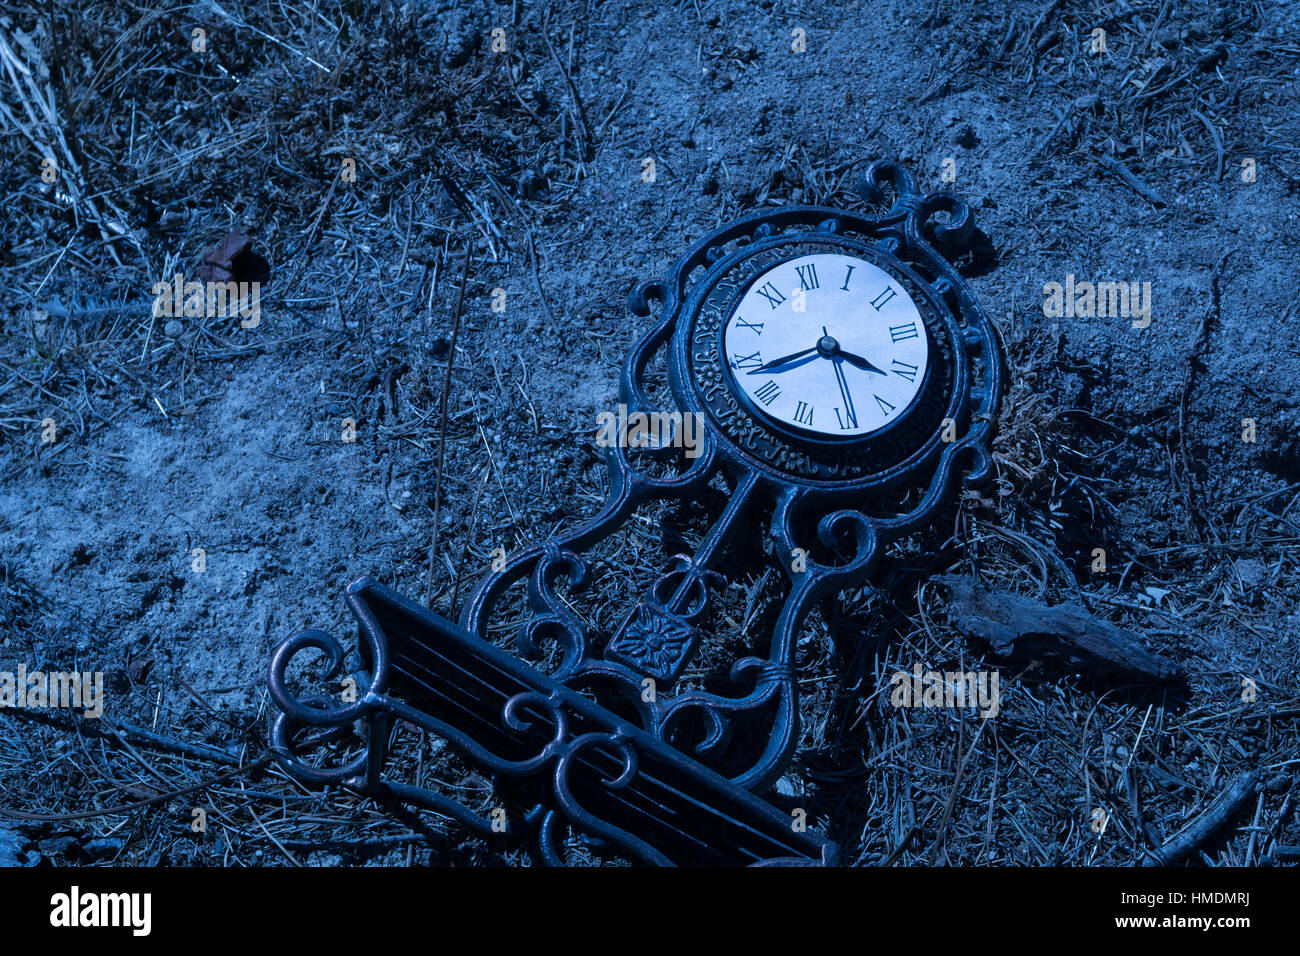 An old clock in the dirt Stock Photo